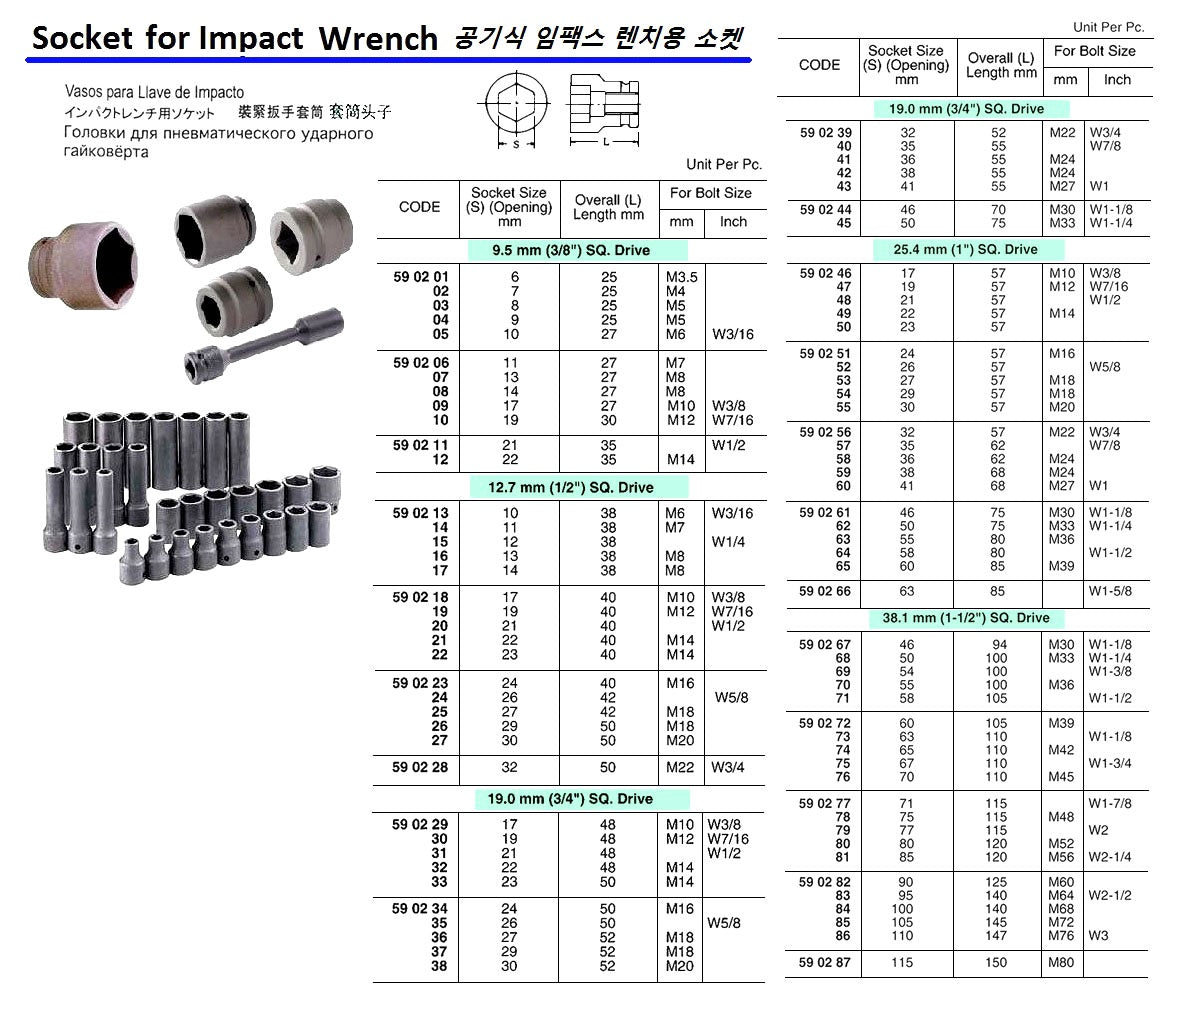 590202-SOCKET FOR IMPACT WRENCH, 9.5MM/SQ DR. X 7MM